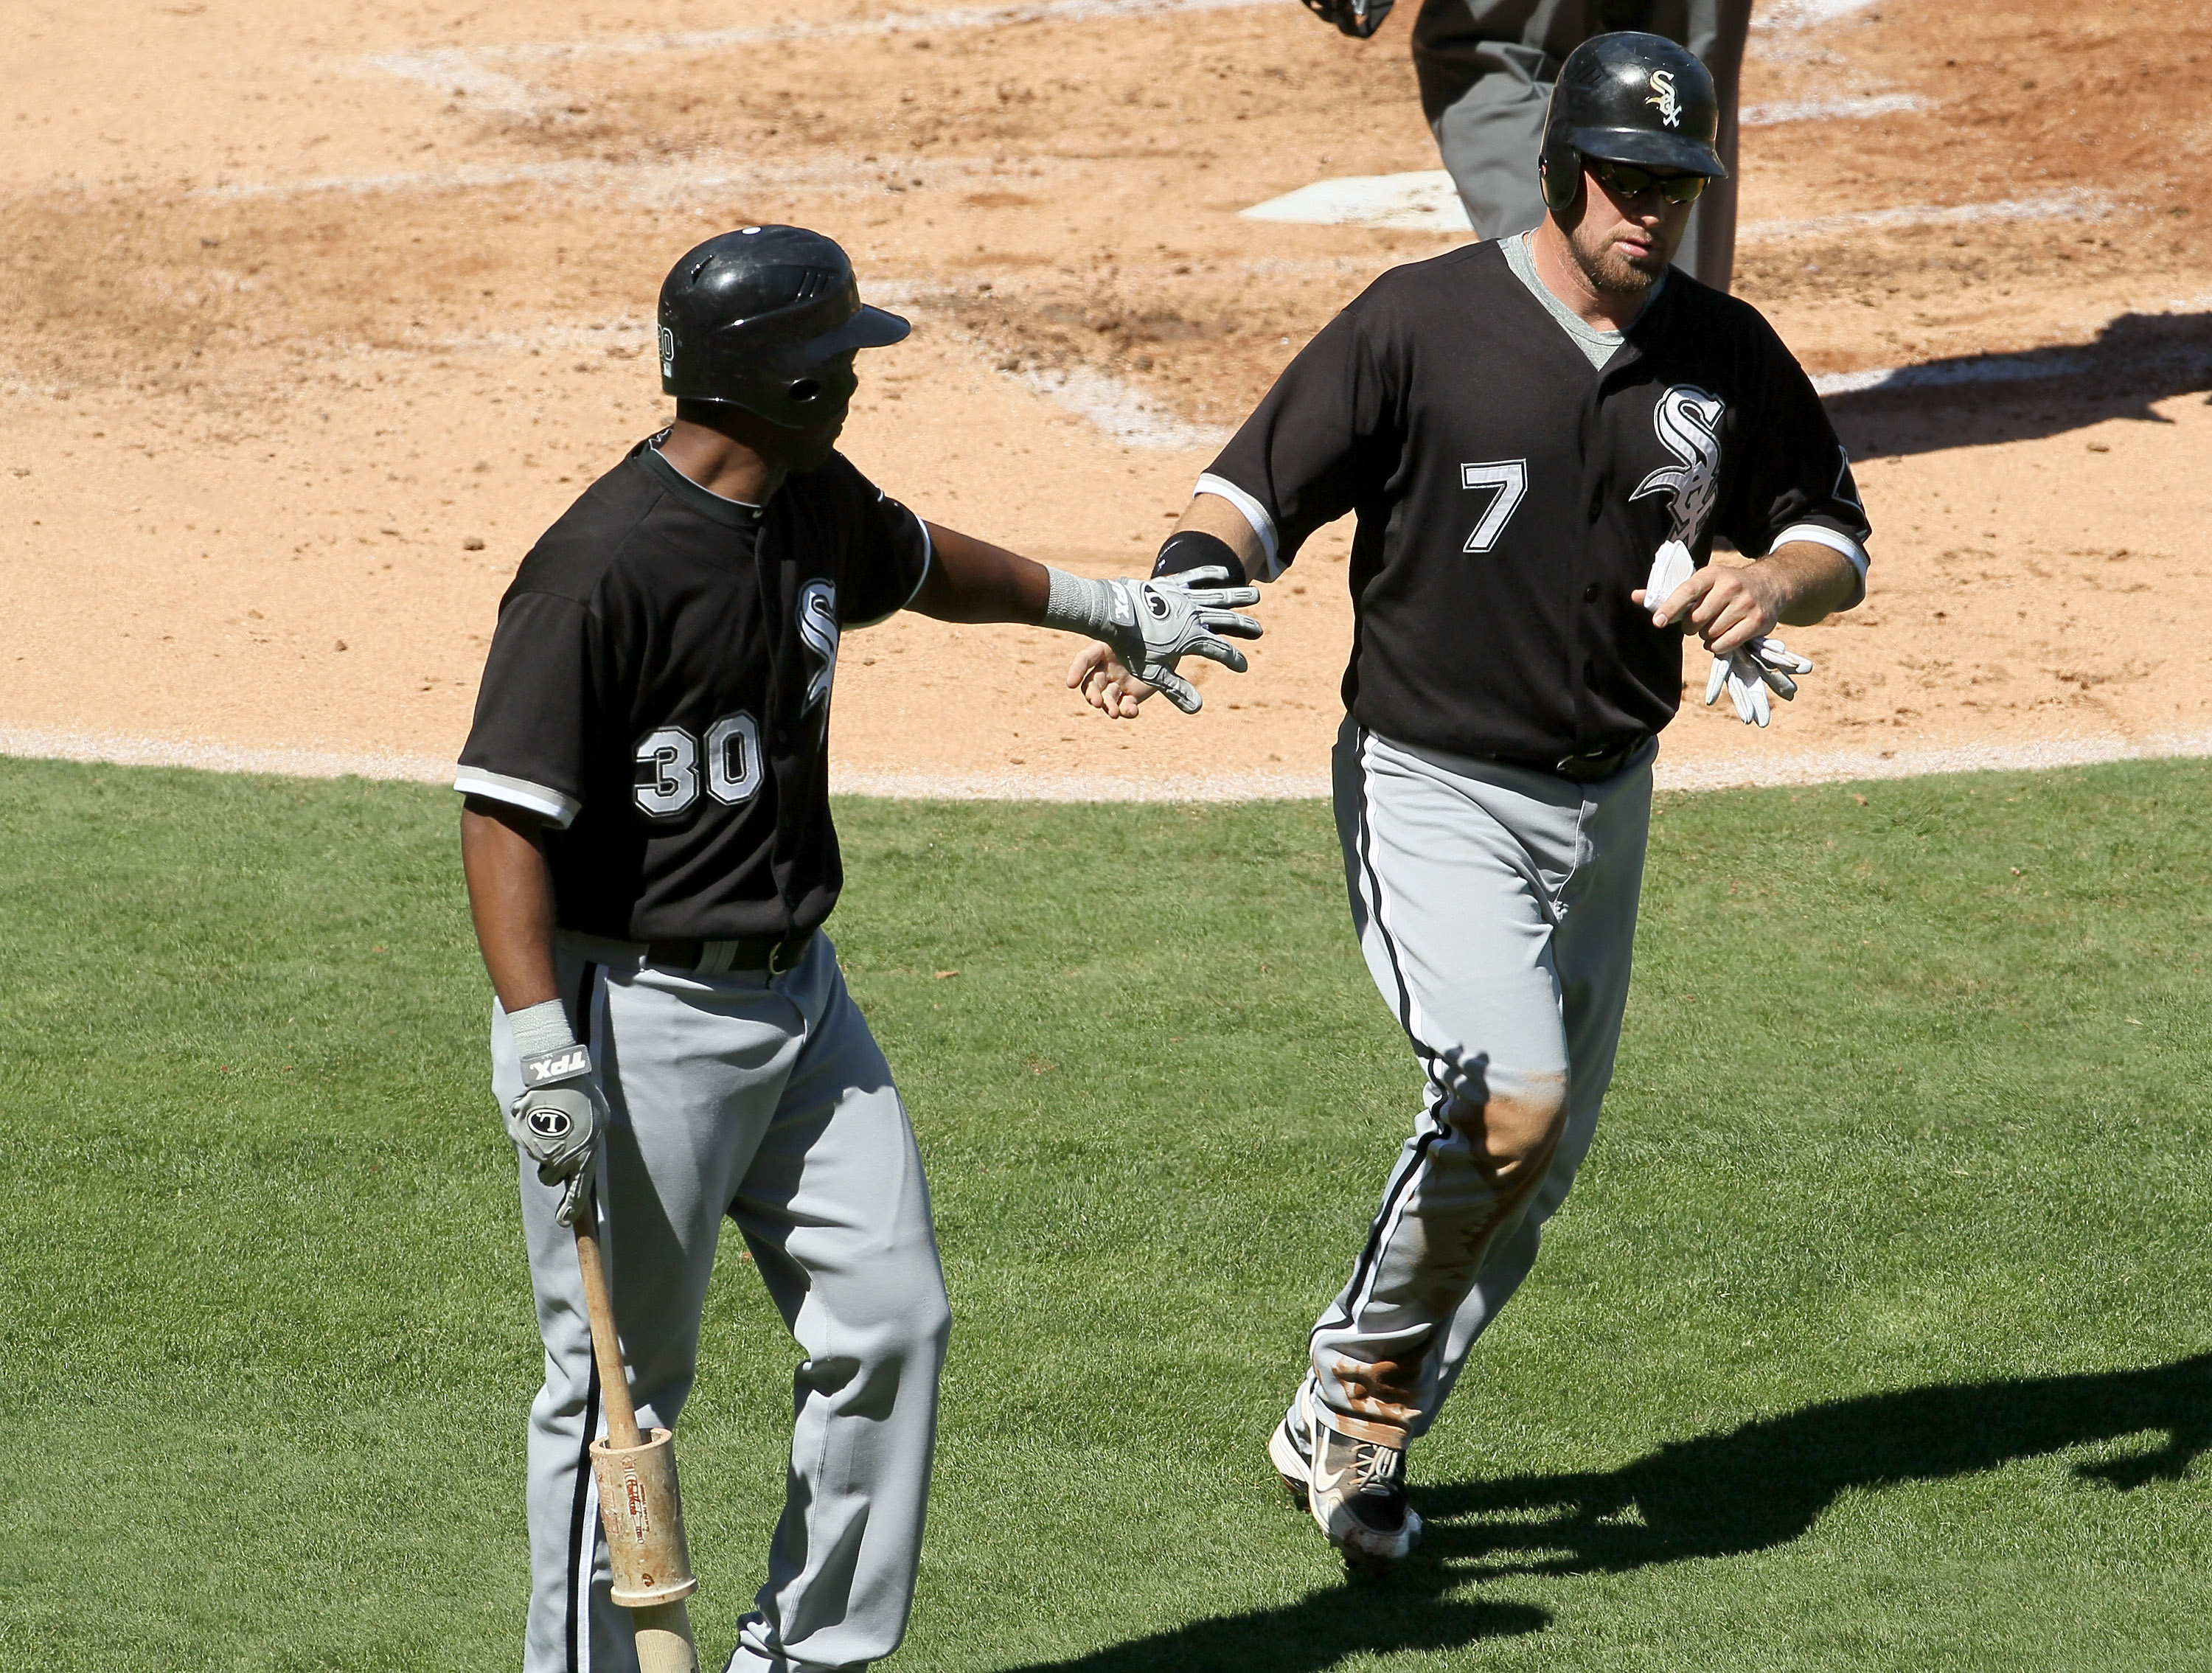 ANAHEIM, CA - SEPTEMBER 26:  Mark Kotsay #7 of the Chicago White Sox is greeted by Alejandro De Aza #30 after scoring on a sacrifice fly in the second inning against the Los Angeles Angels of Anaheim in the second inning on September 26, 2010 at Angel Sta